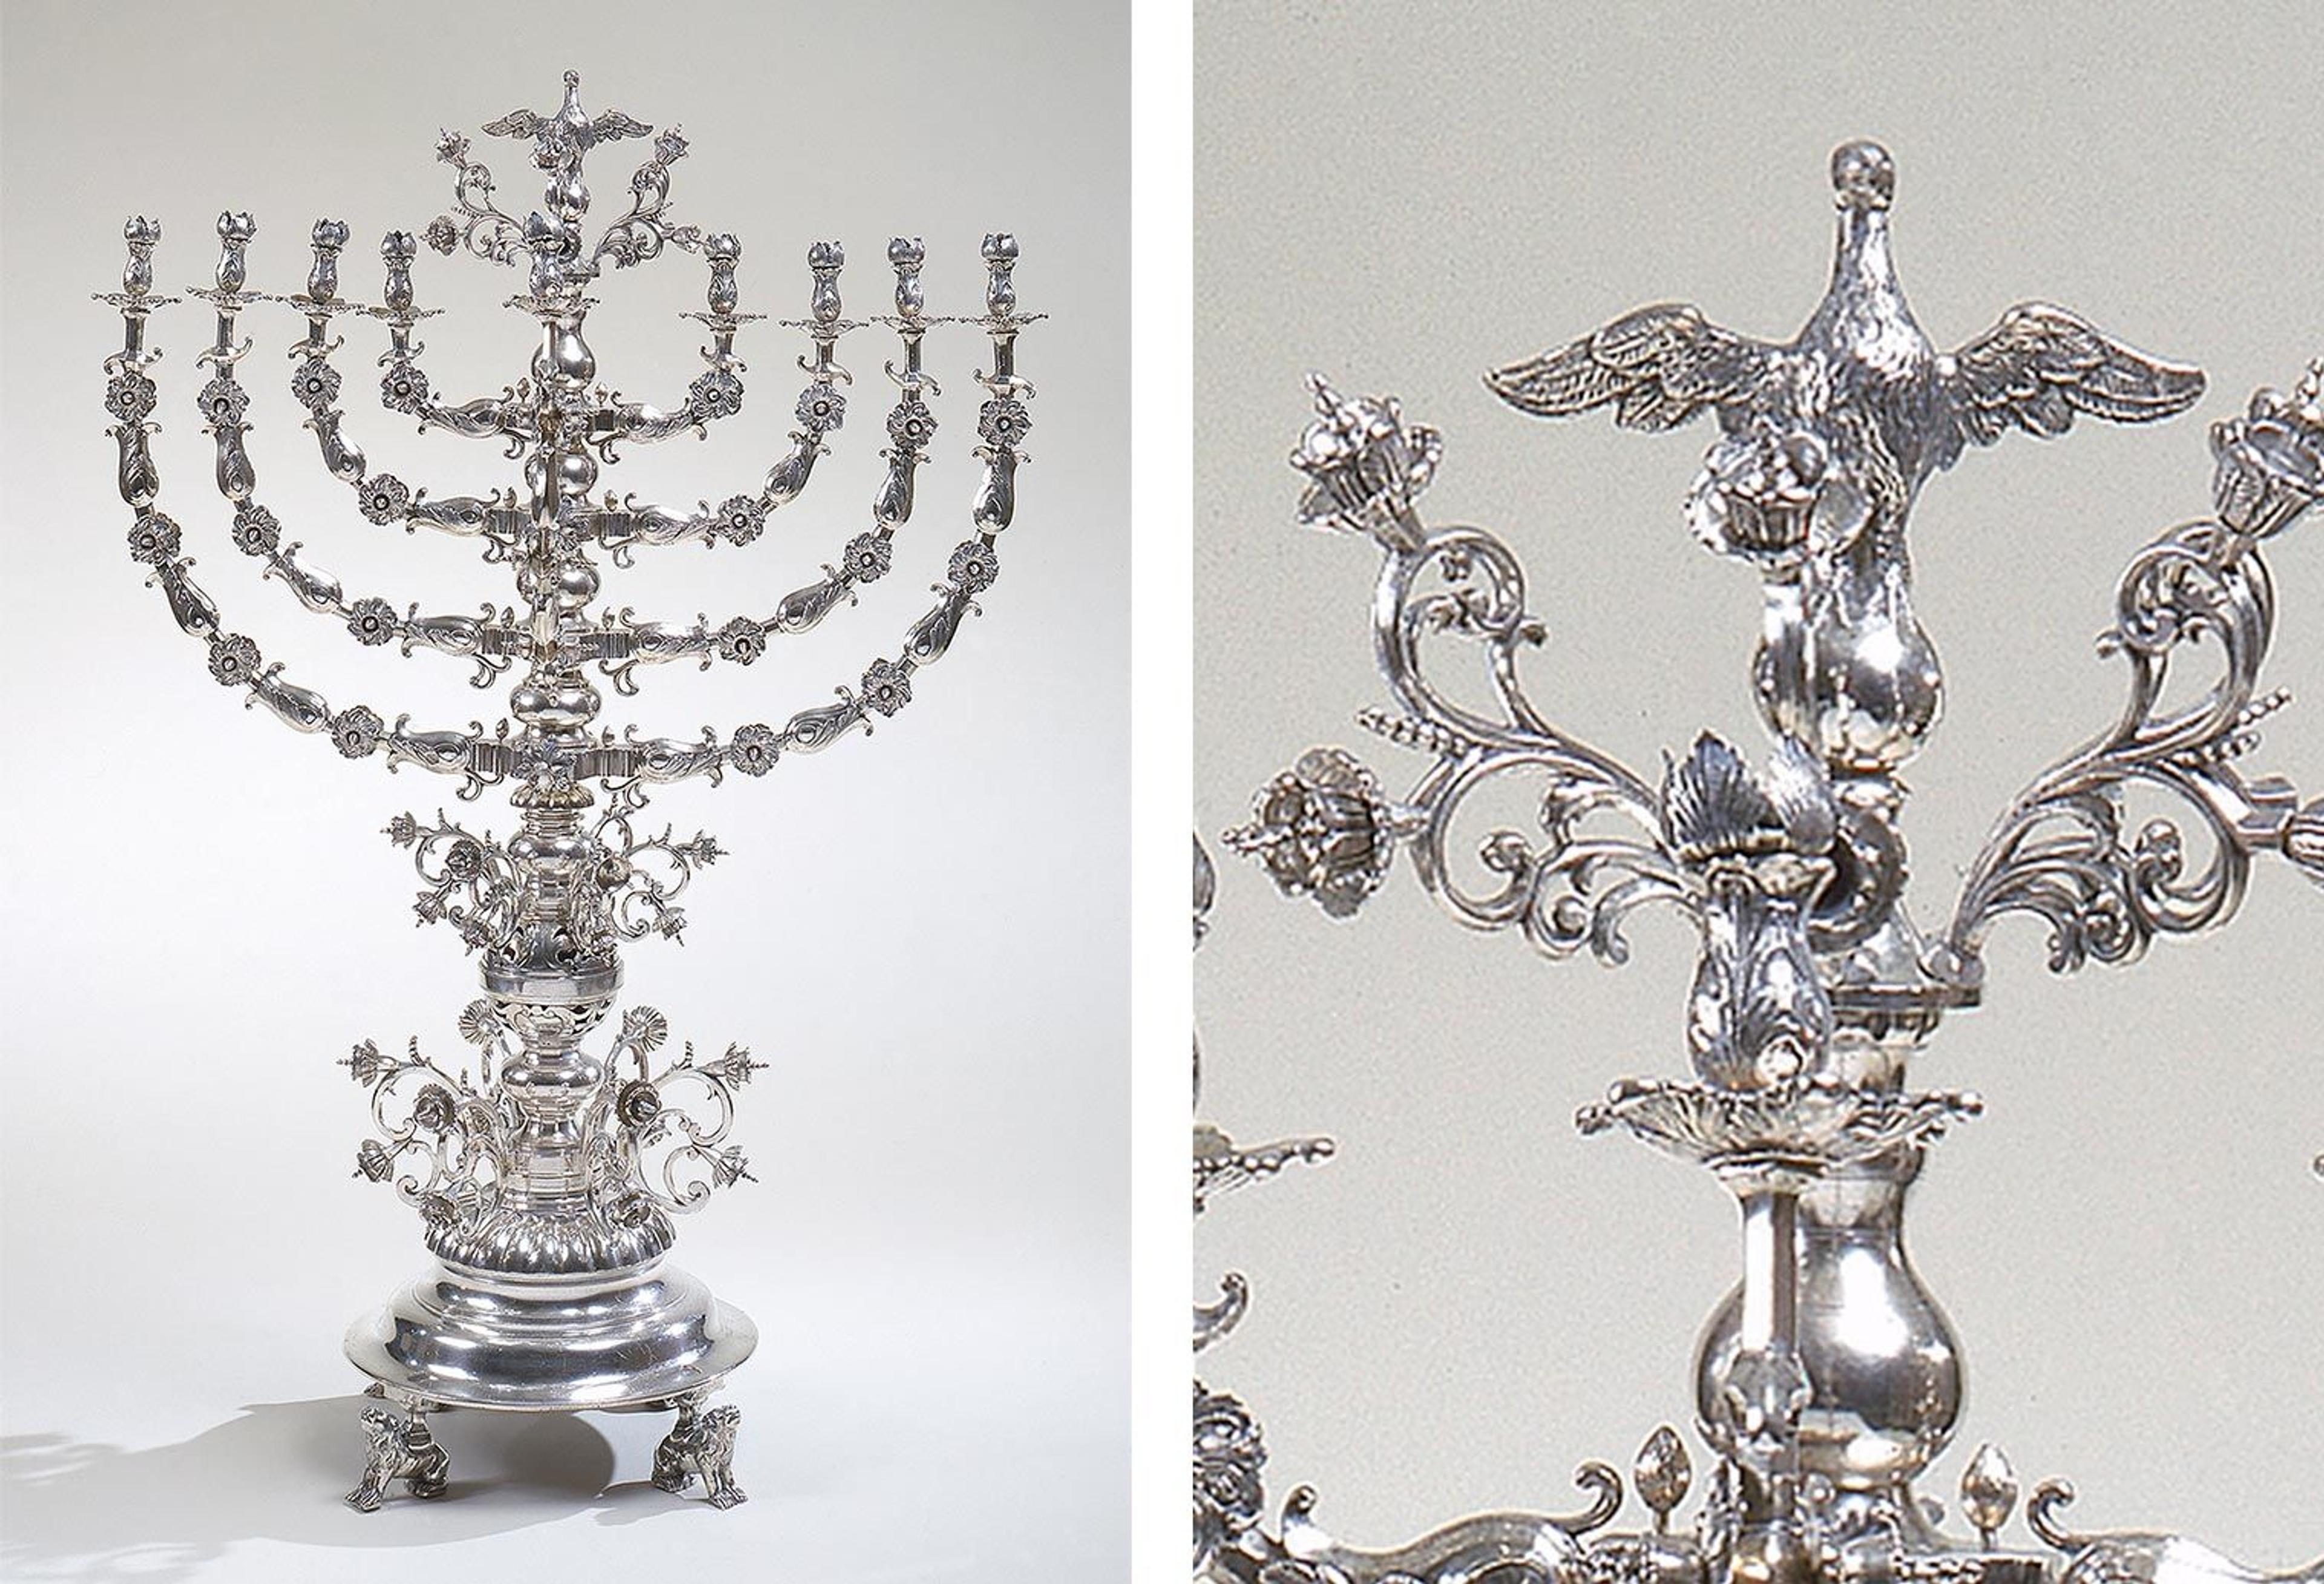 An ornate silver menorah with flowers, birds, and lions